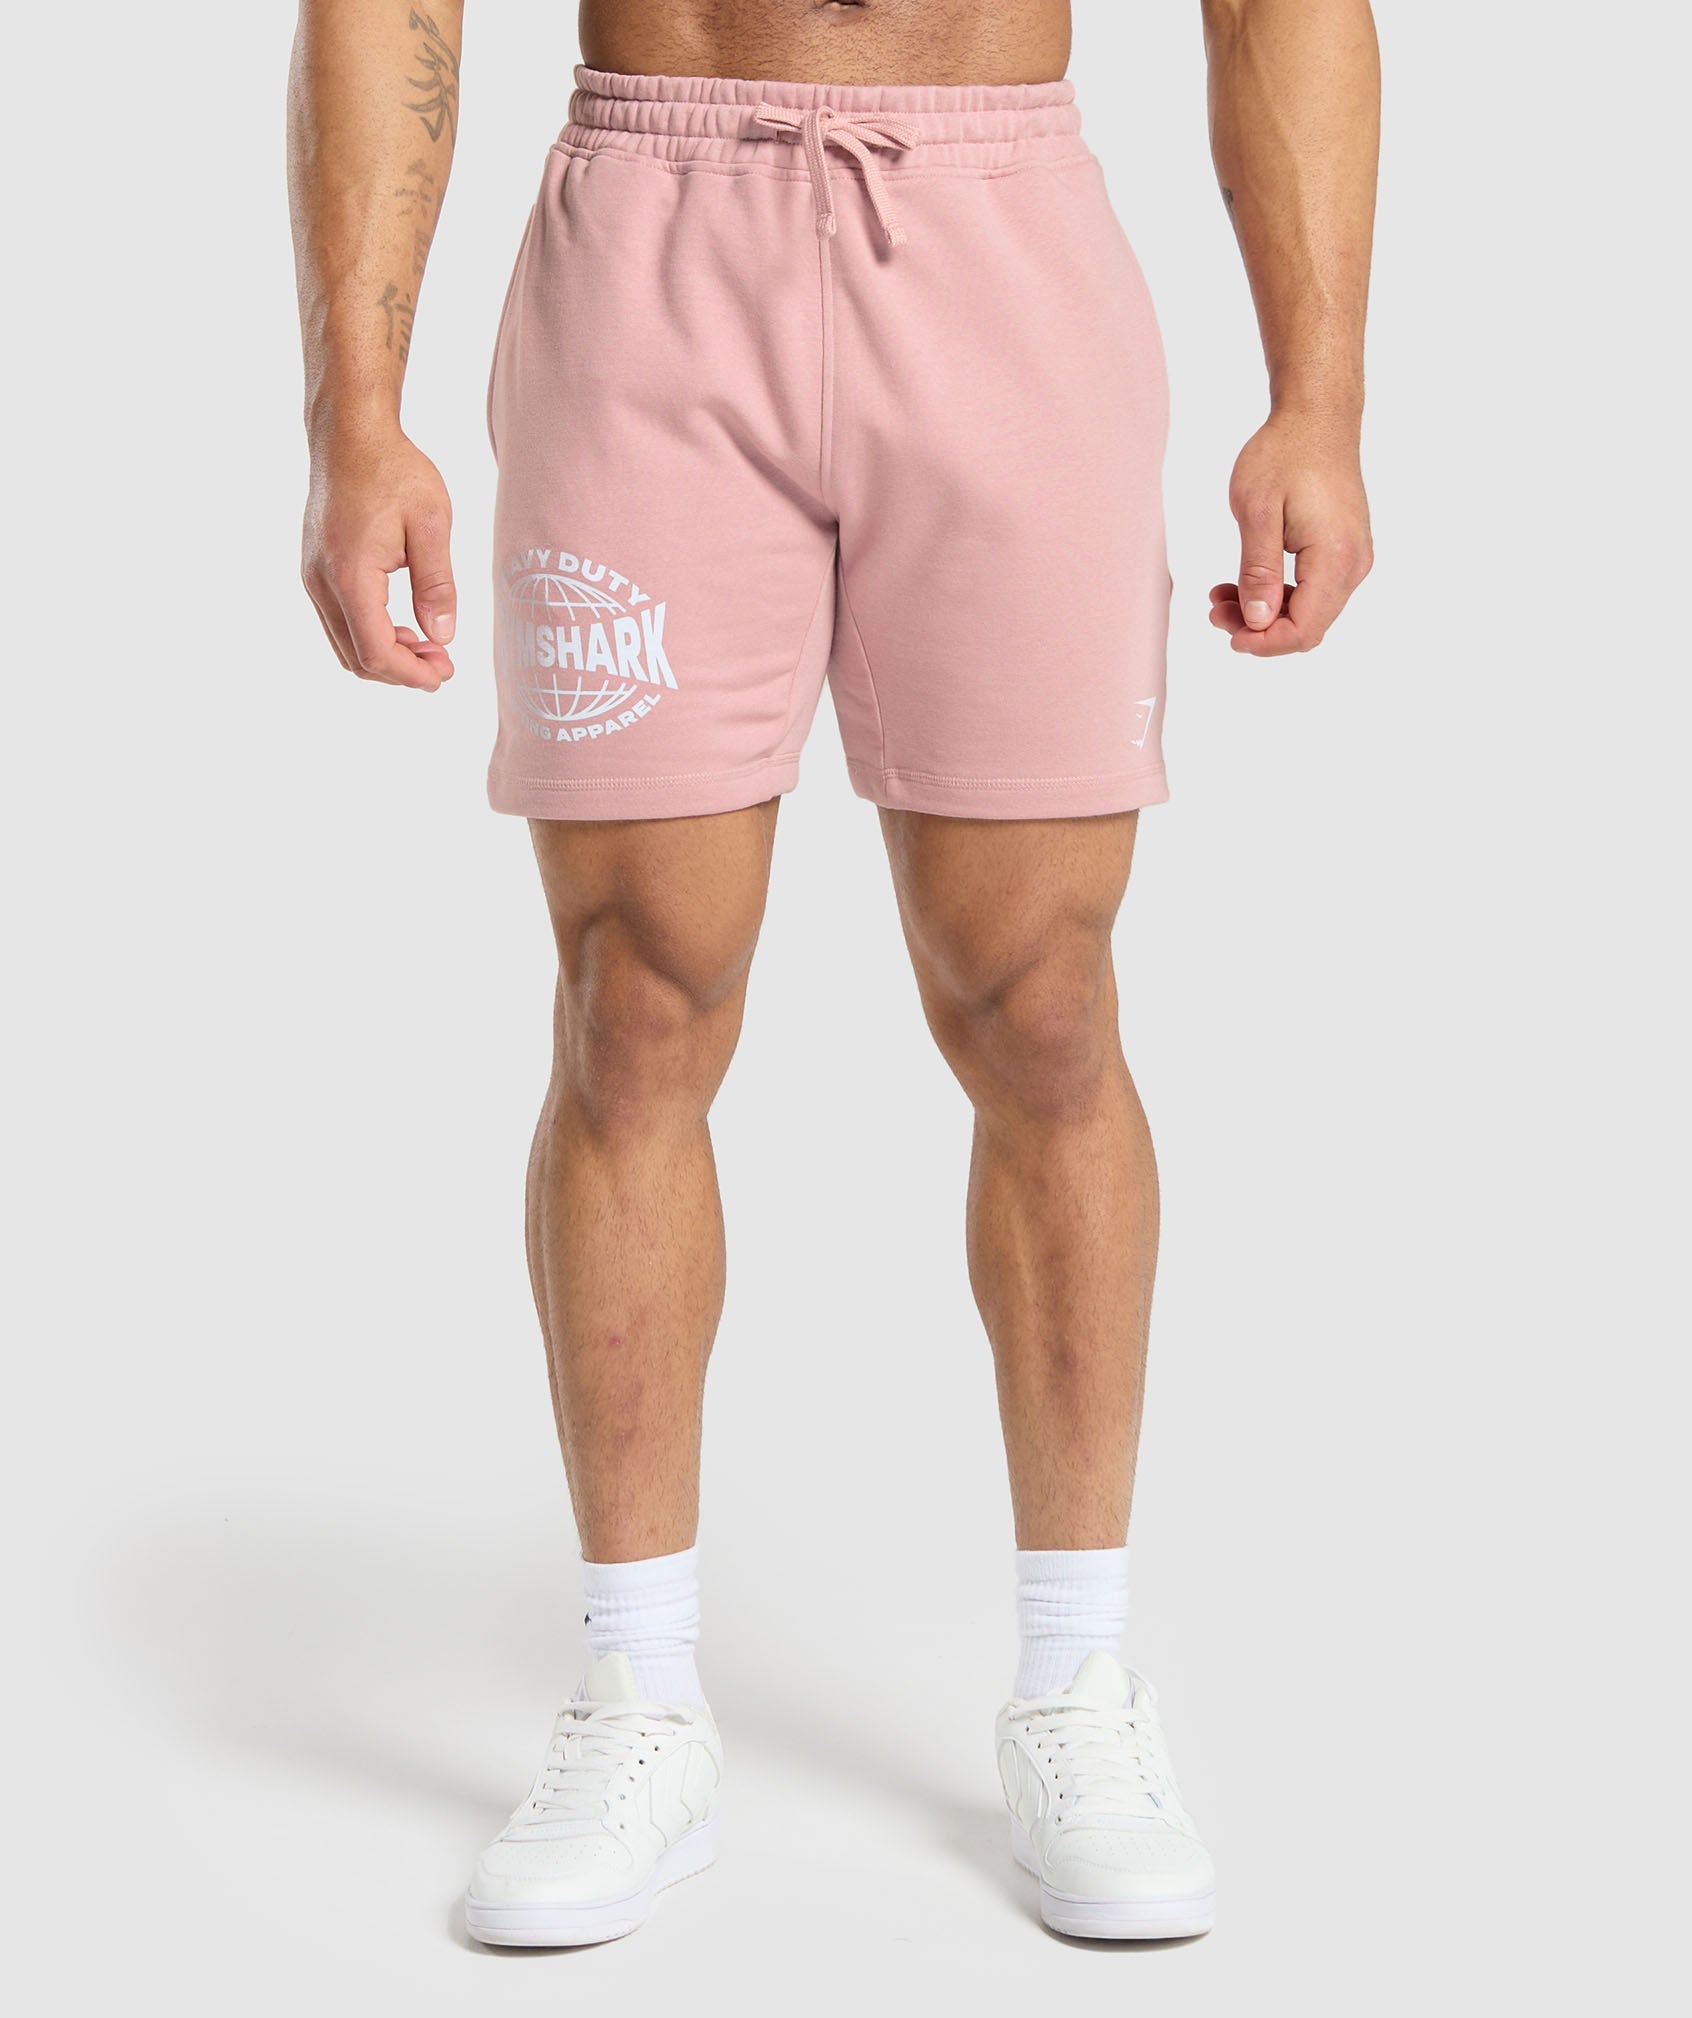 Heavy Duty Apparel 7" Shorts in Light Pink - view 1